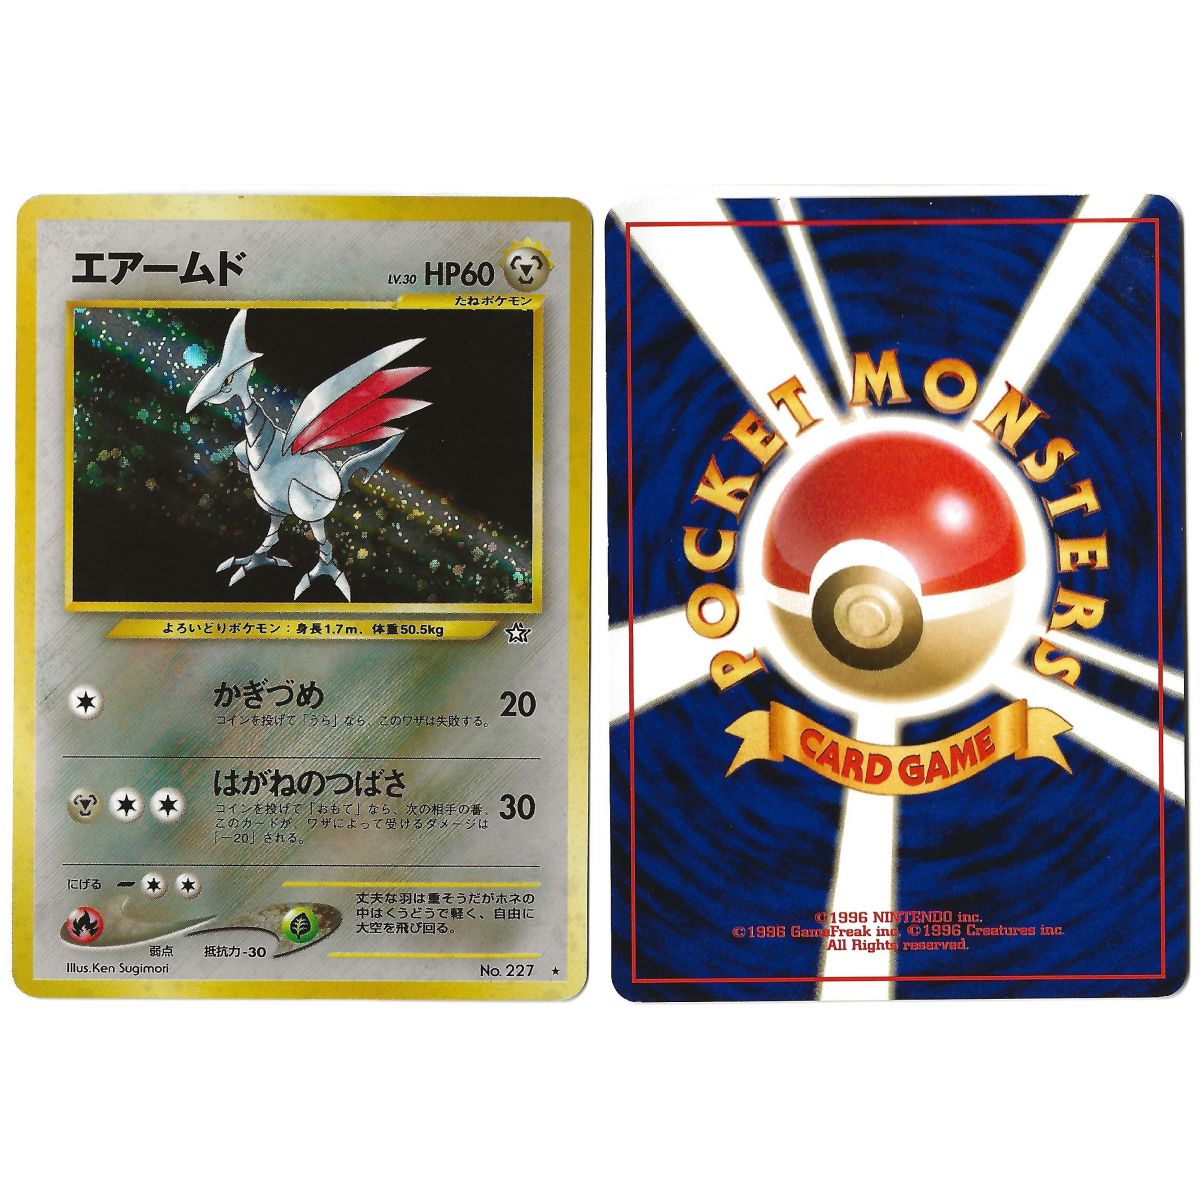 Skarmory (1) No.227 Gold, Silver, to a New World... N1 Holo Unlimited Japanese View Scan